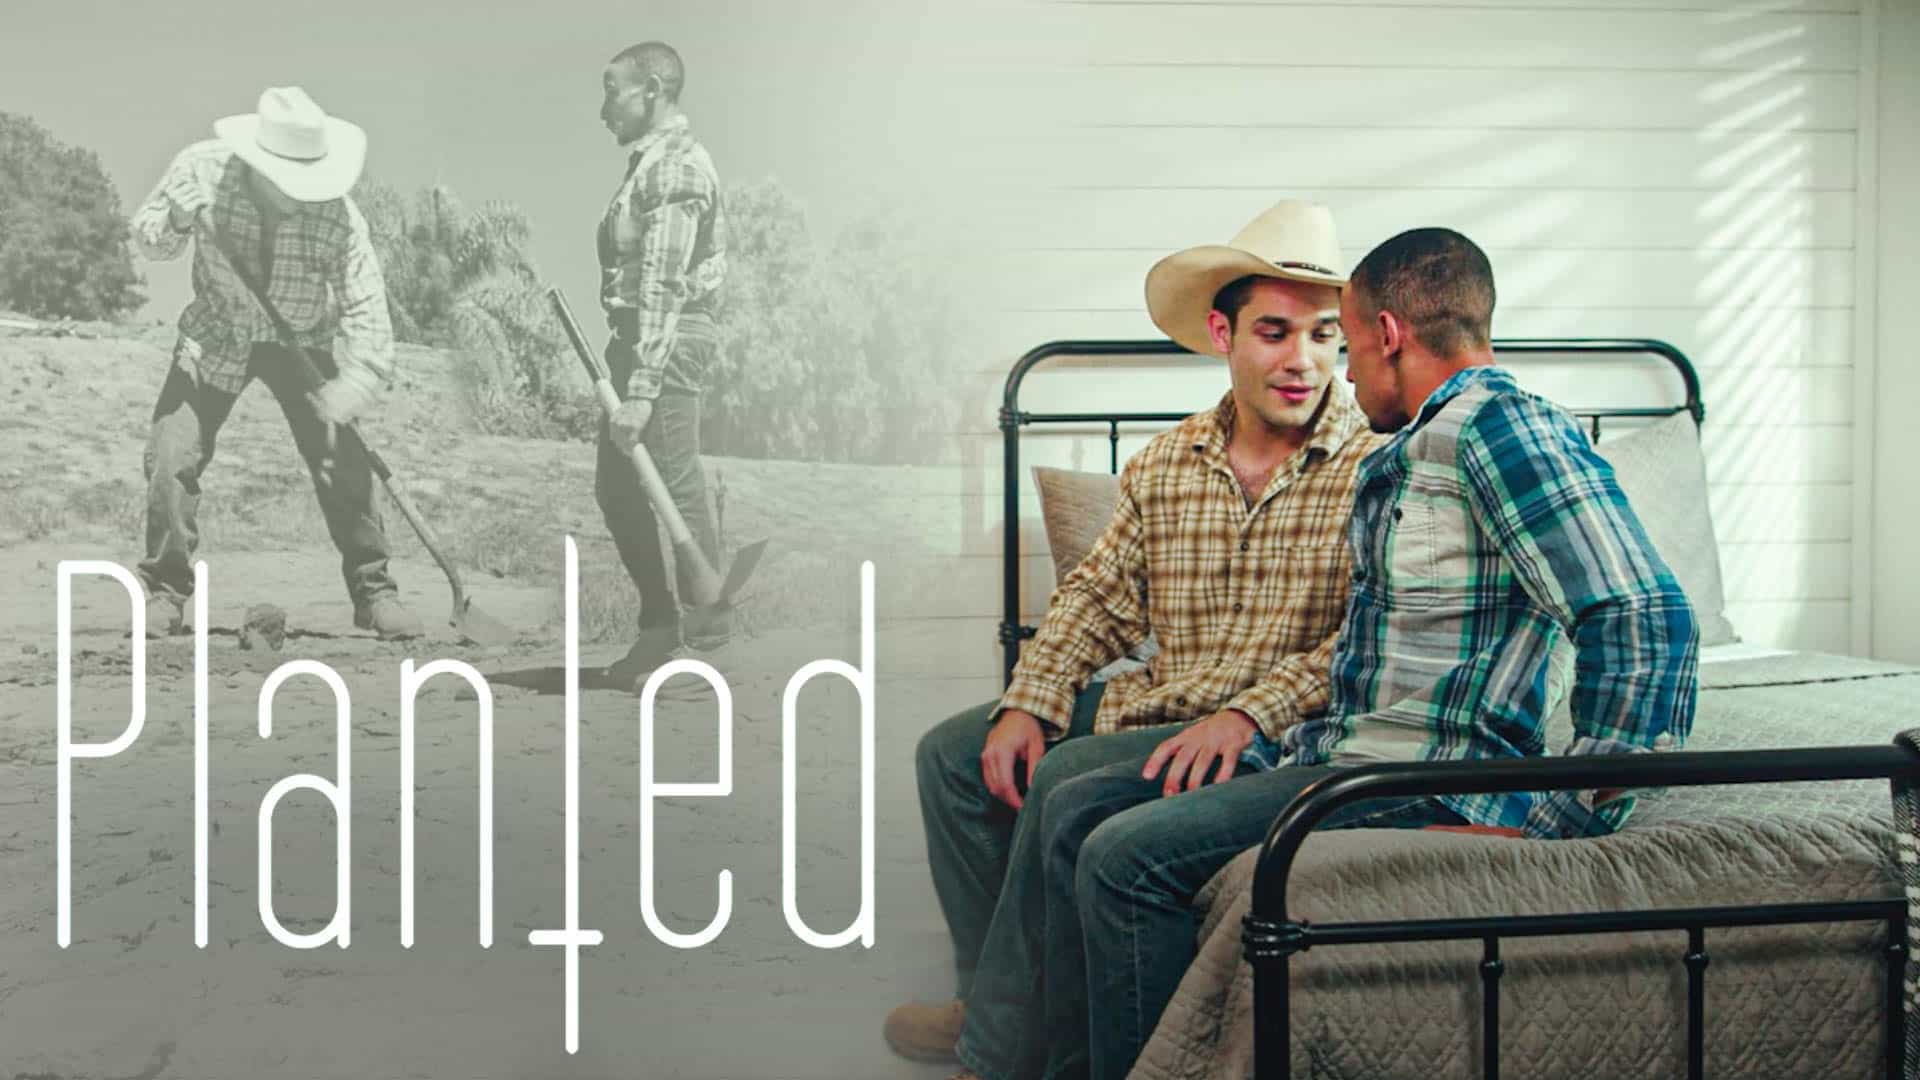 Planted – Andrew Miller and Jimmy West